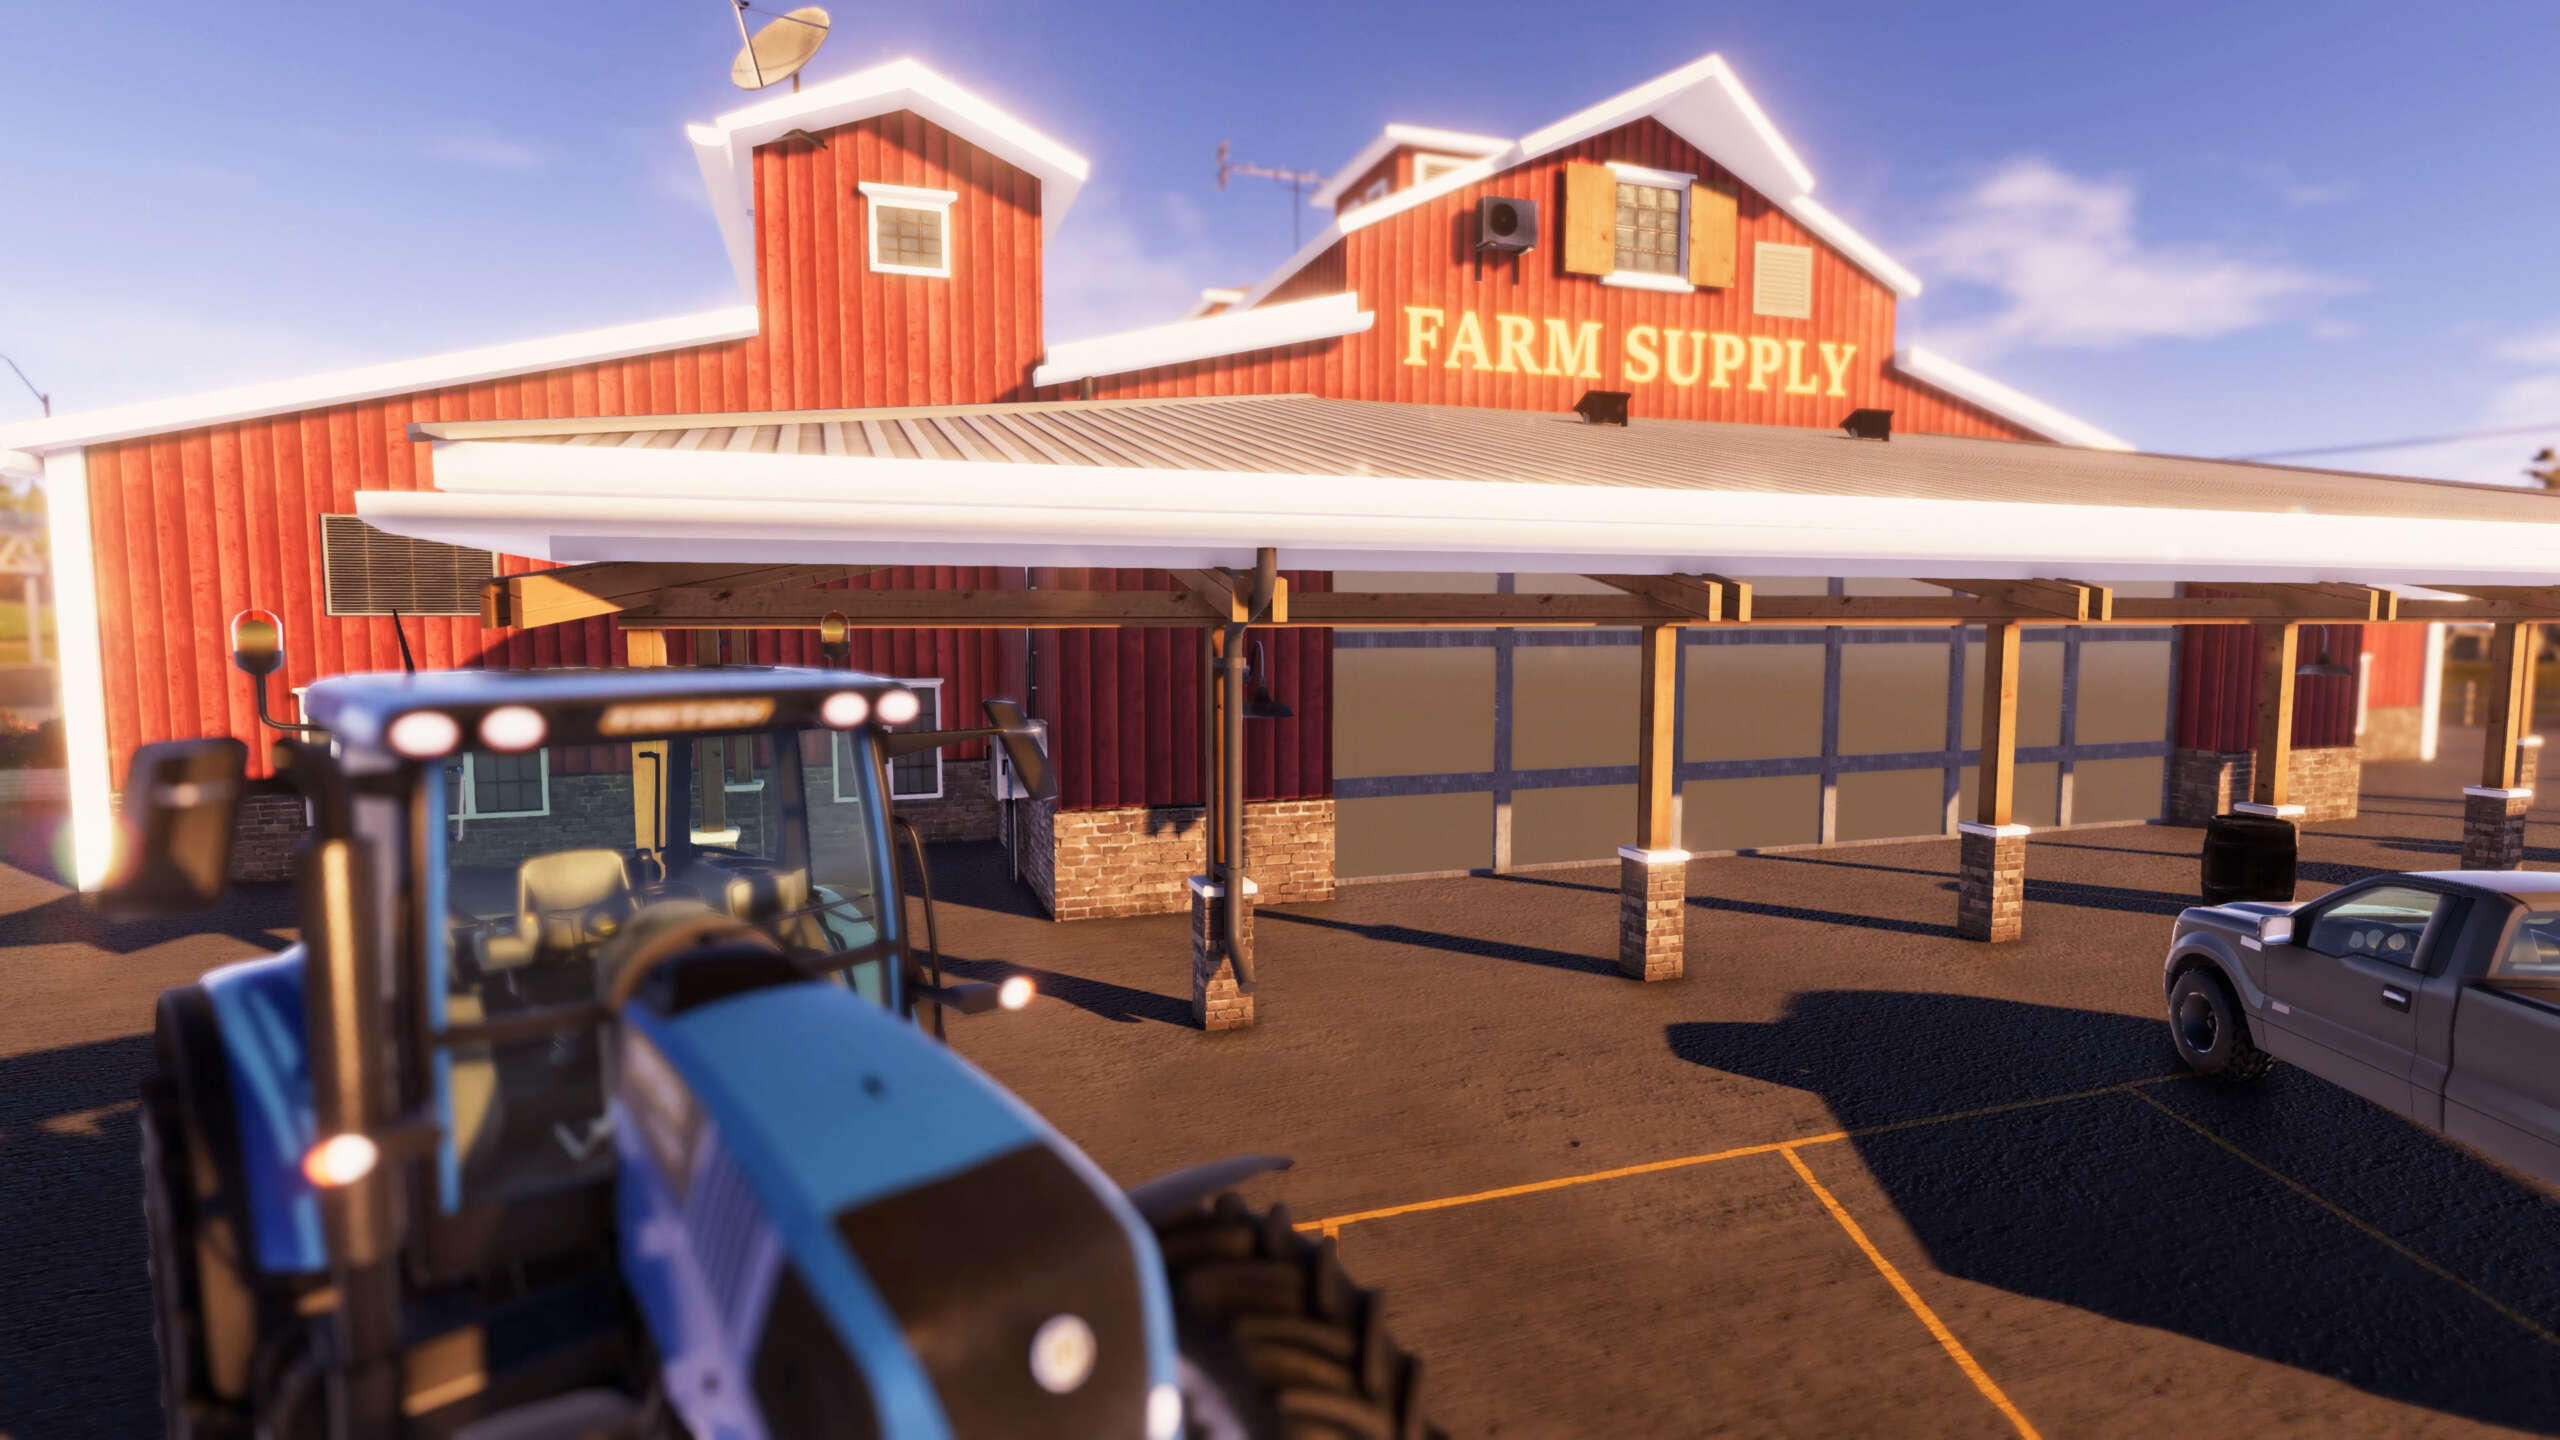 Real Farm – Gold Edition Will Come To PC, PlayStation 4, And Xbox One Fans Bringing An Enriching Virtual Farming Enviroment